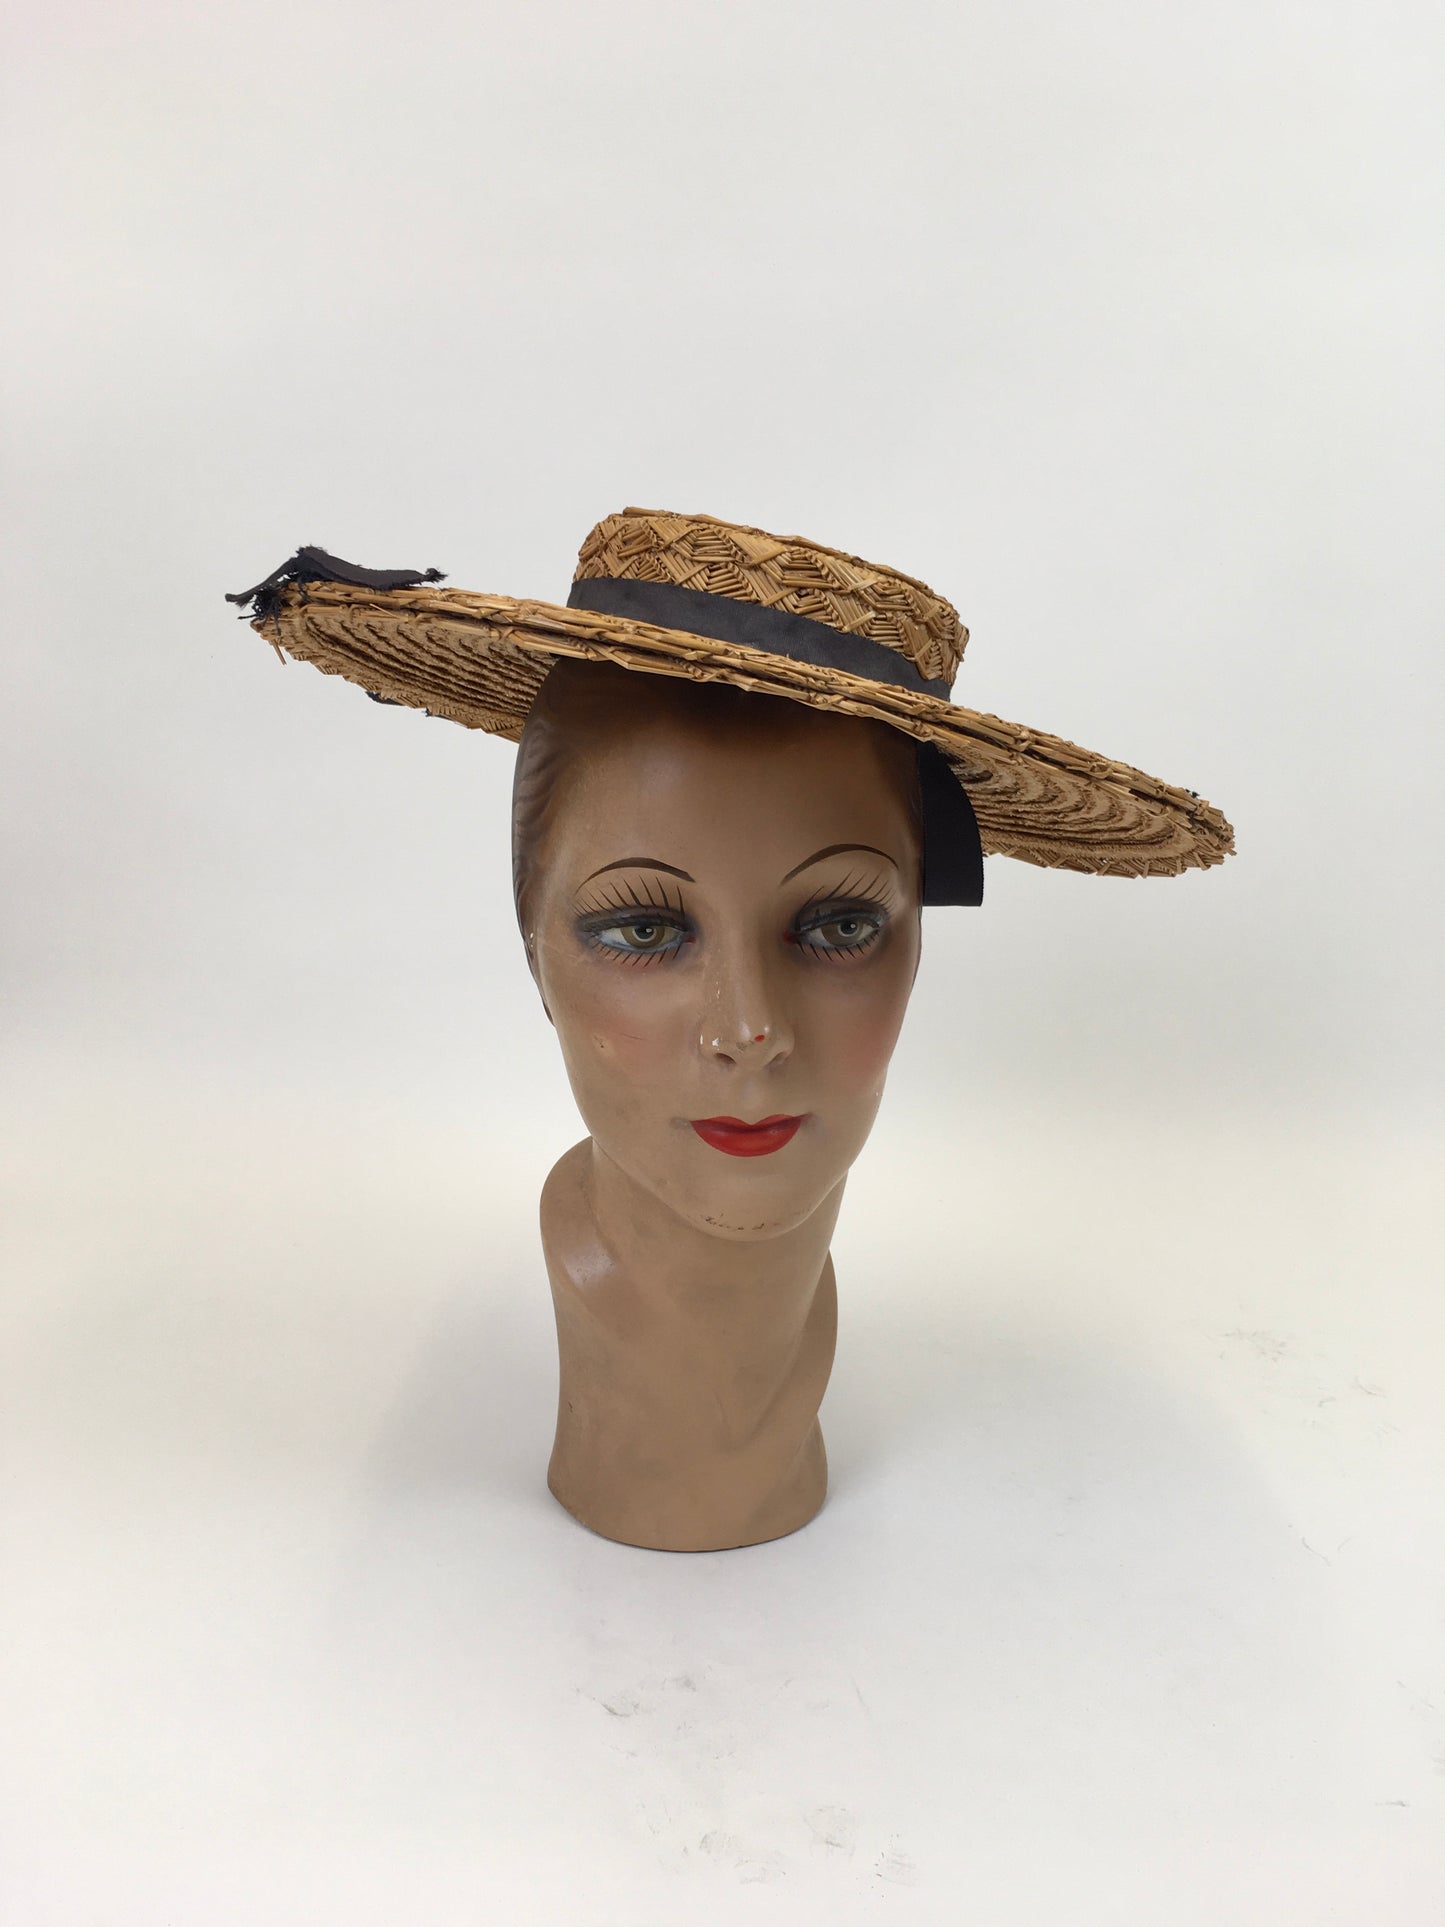 Original 1940’s Fabulous Straw Hat - With Navy Grosgrain Bows and Veiling